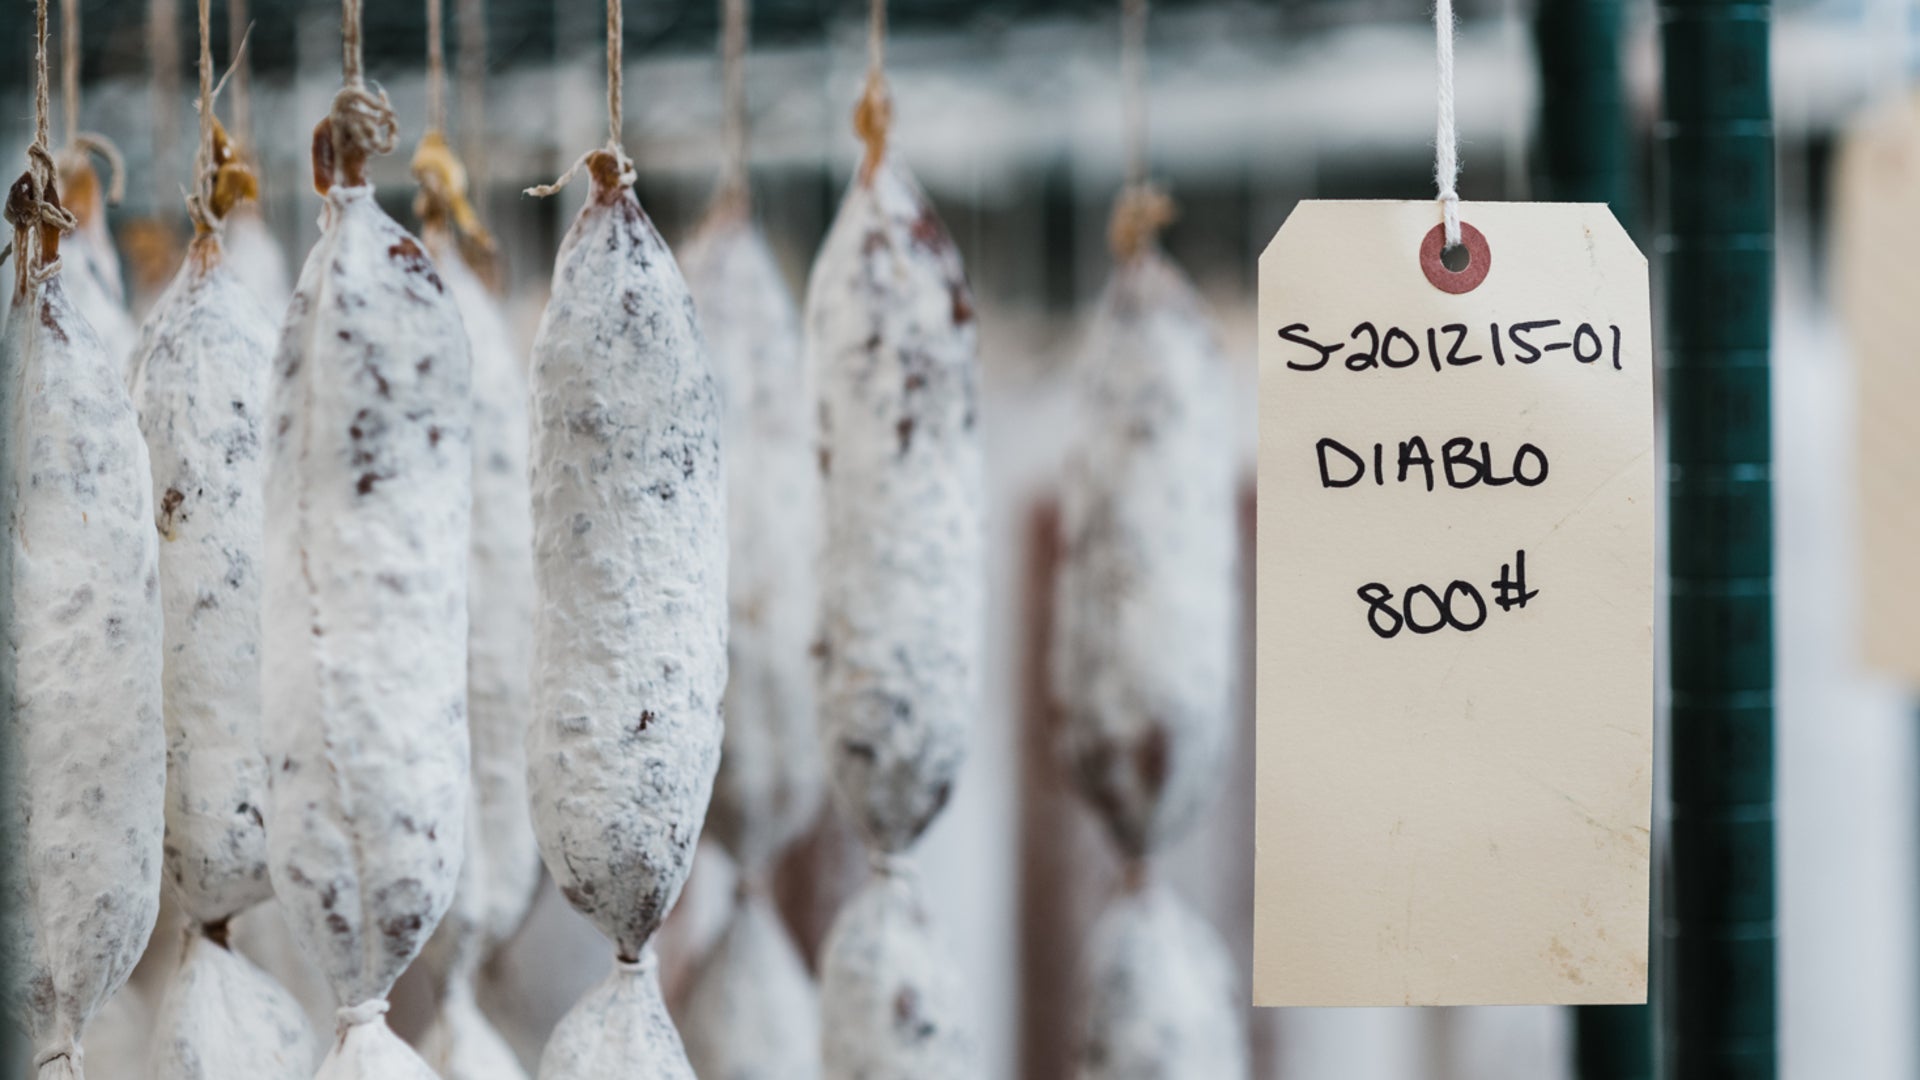 A picture showing hanging salami with a thick coat of good mold to protect the meat from spoiling.